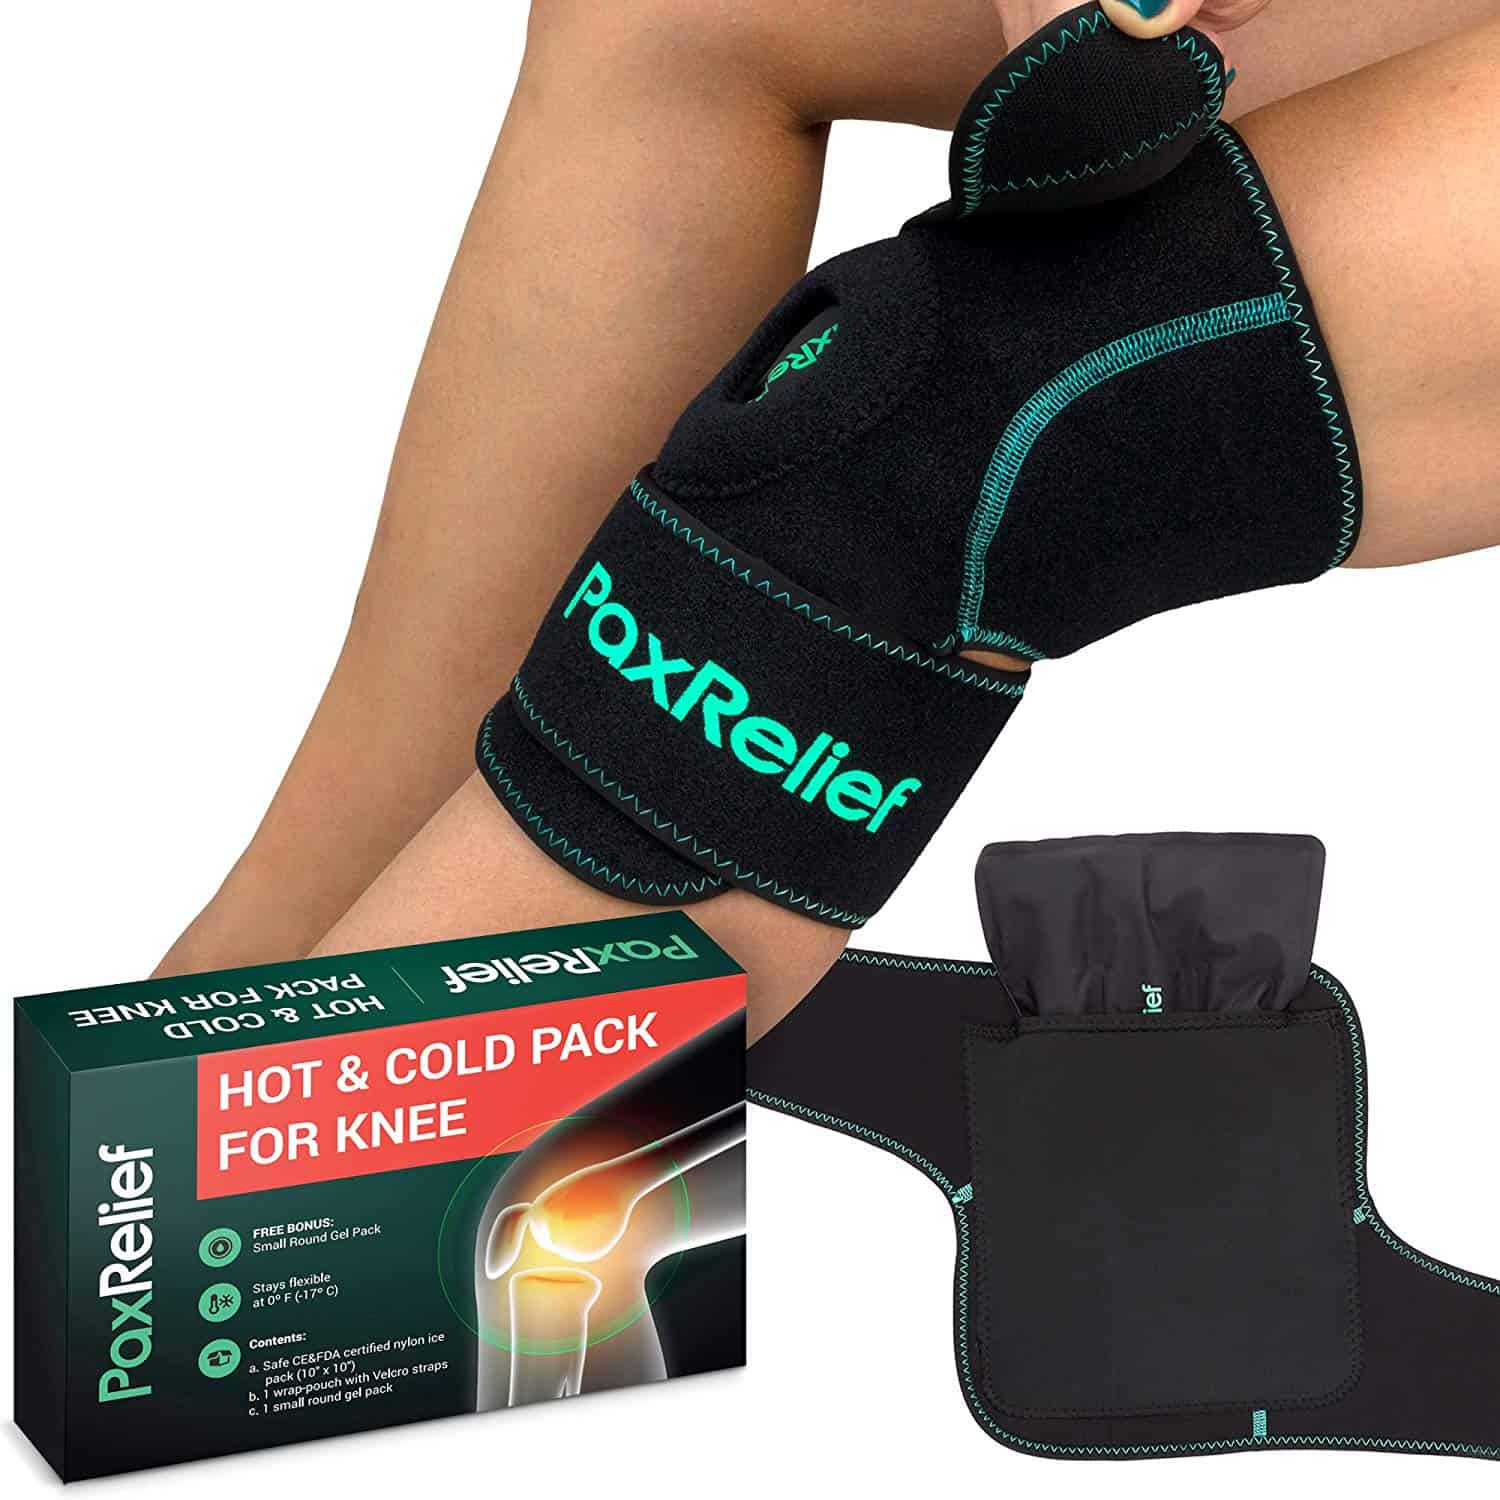 Top 10 Best Ice Packs for Knee in 2020